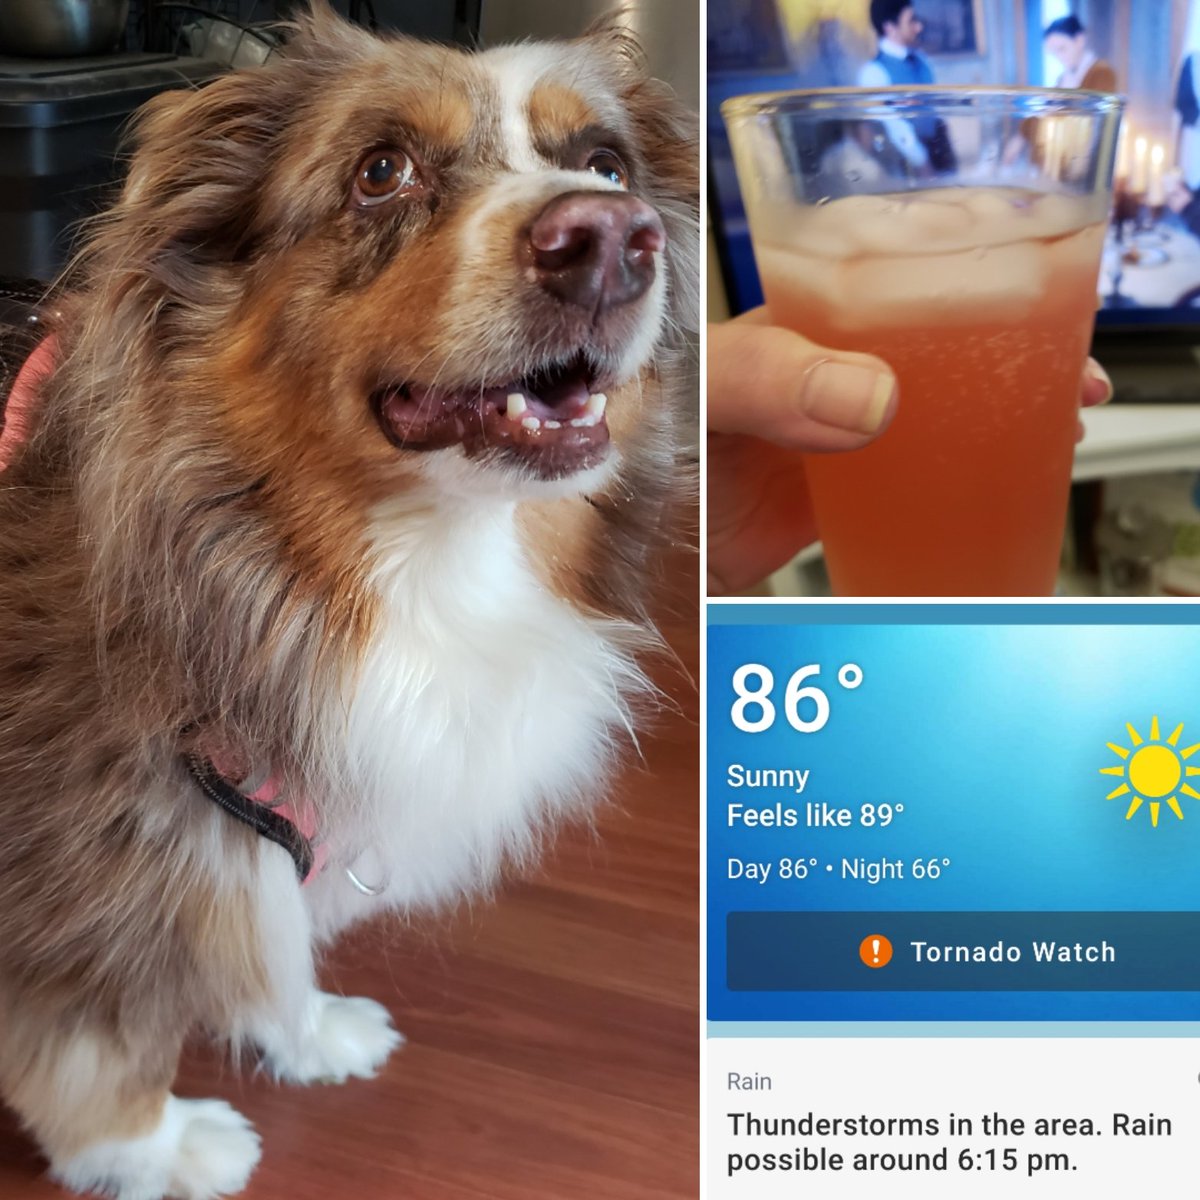 Mommy and me are prepared...don't judge mommy! 🥂🤣
#dogs #australianshepherd #dogsoftwitter #tornadowatch